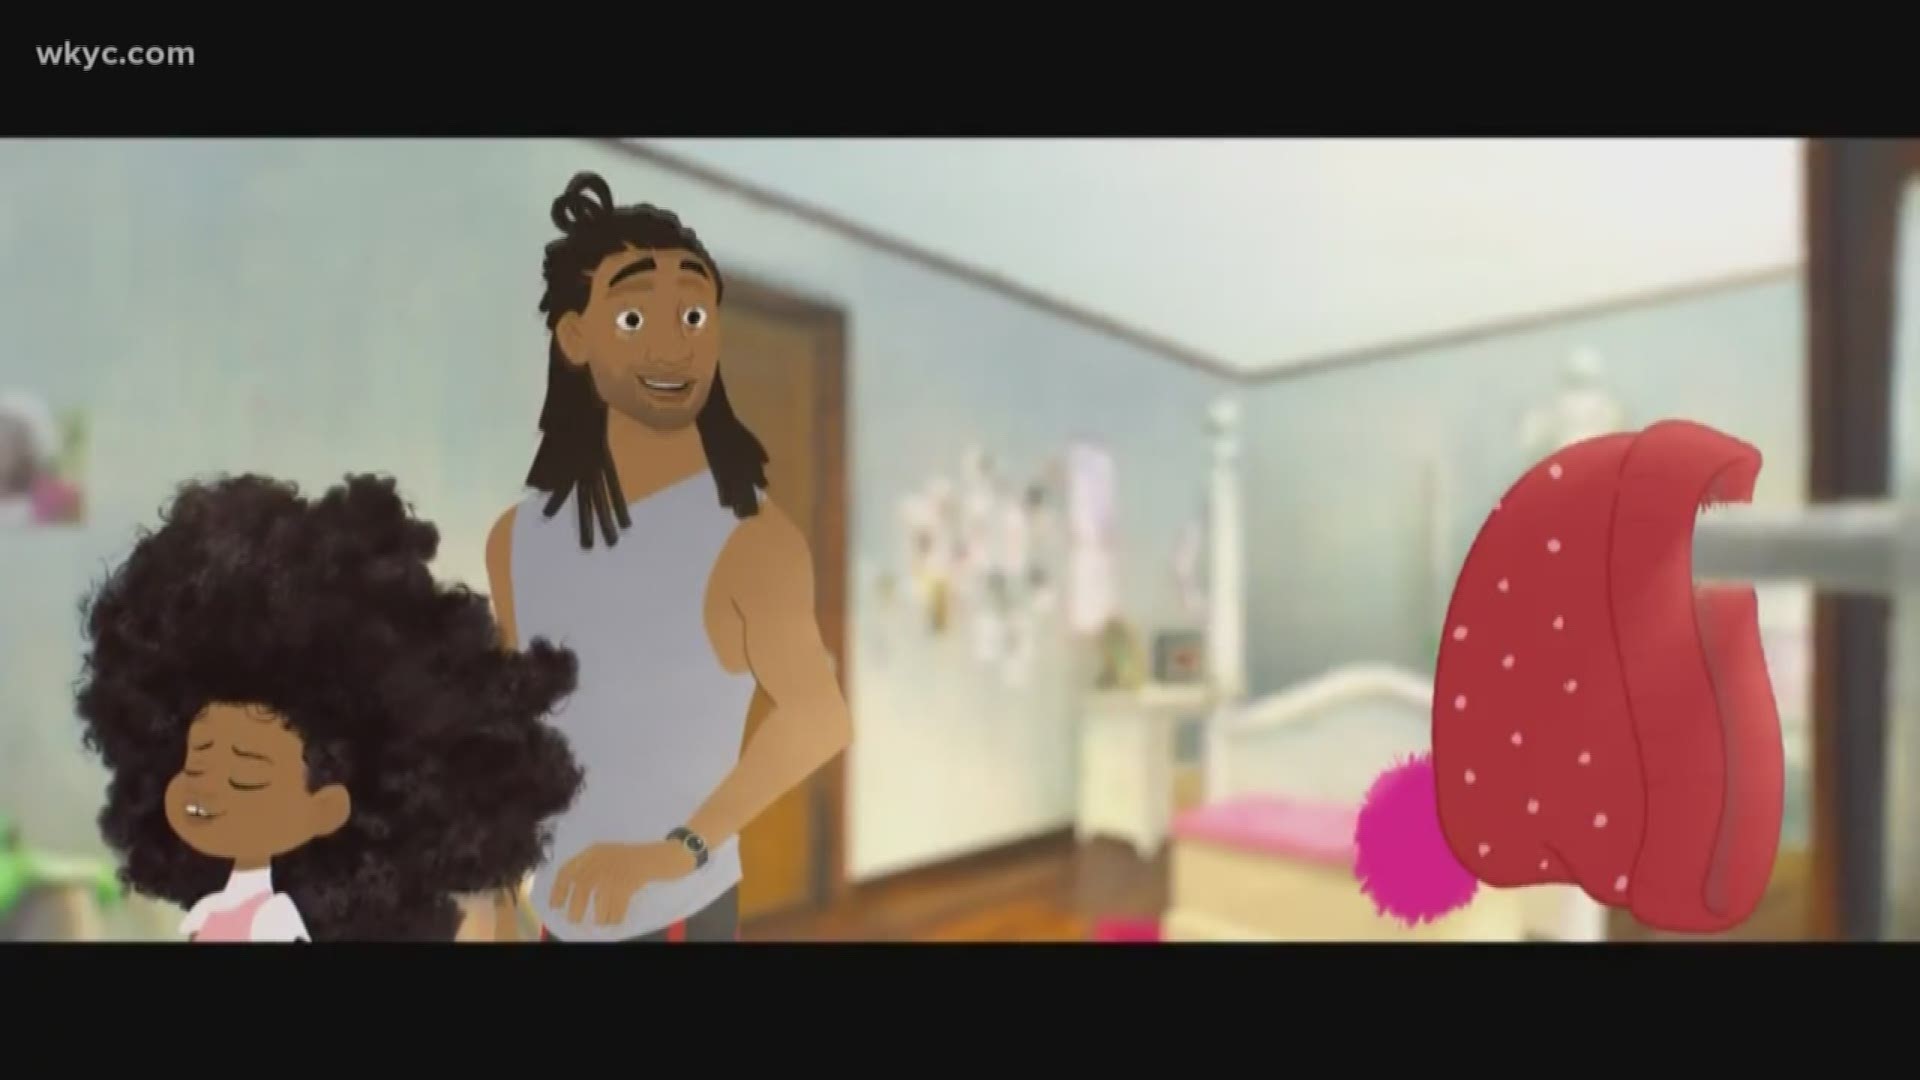 Matthew A. Cherry's Hair Love was nominated for an Oscar in the Best Animated Short Film category. The Oscars air Sunday night at 8 p.m.